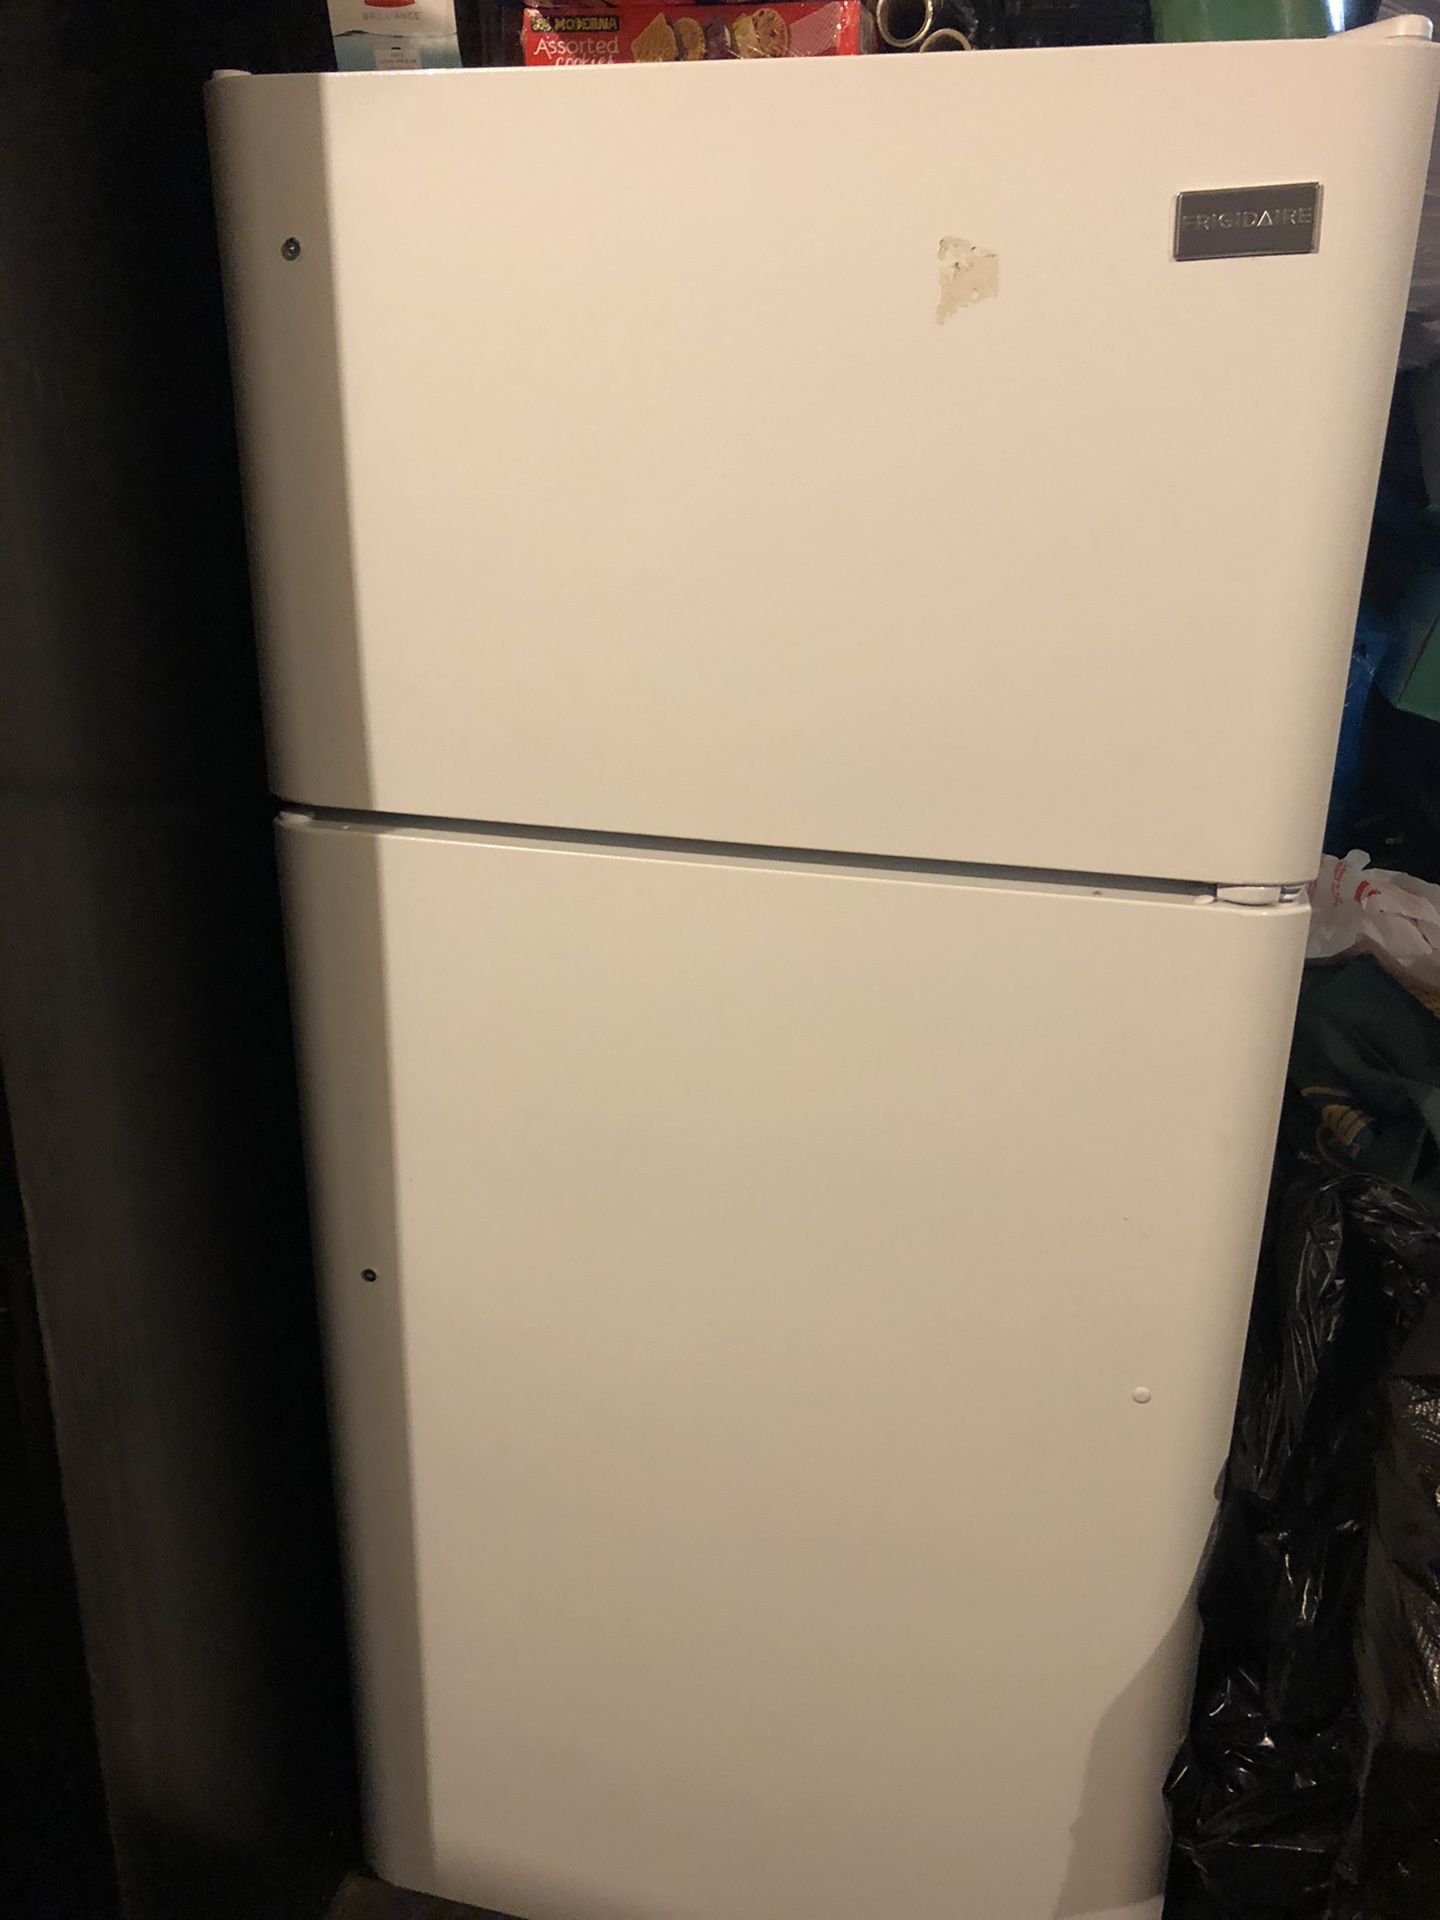 Used refrigerator for sale